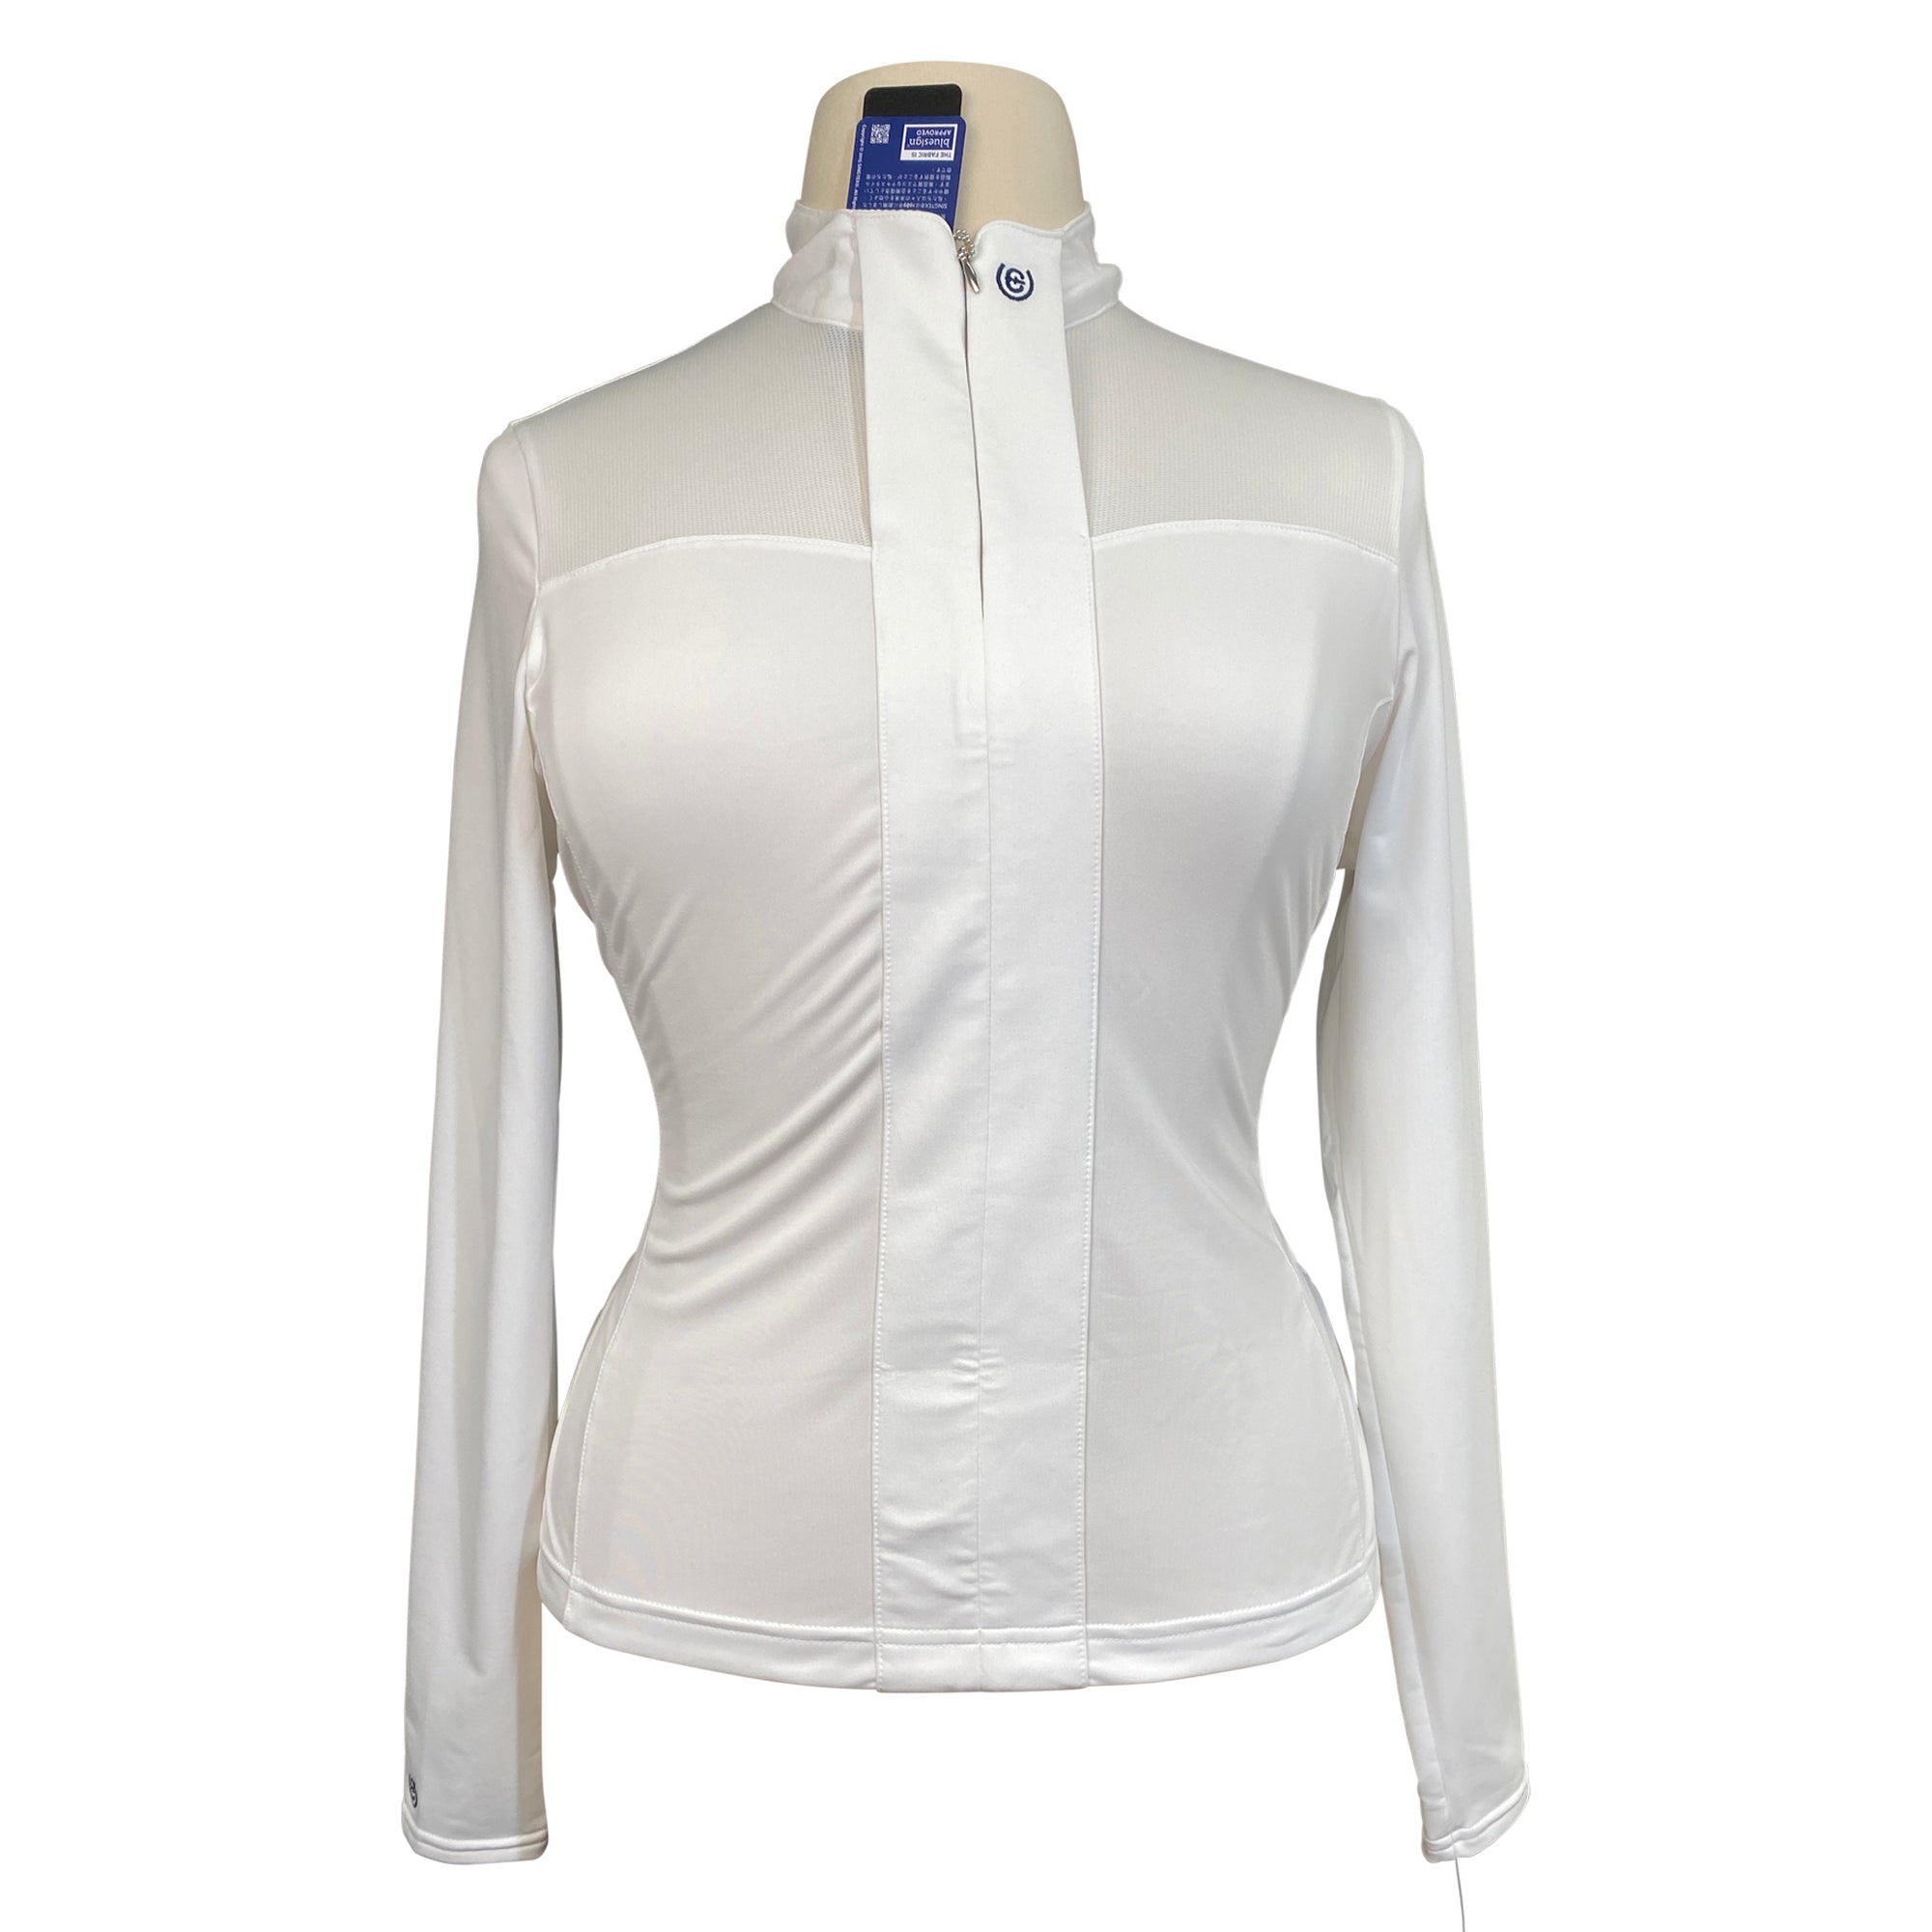 Equestrian Stockholm 'Light Breeze' Competition Shirt in White